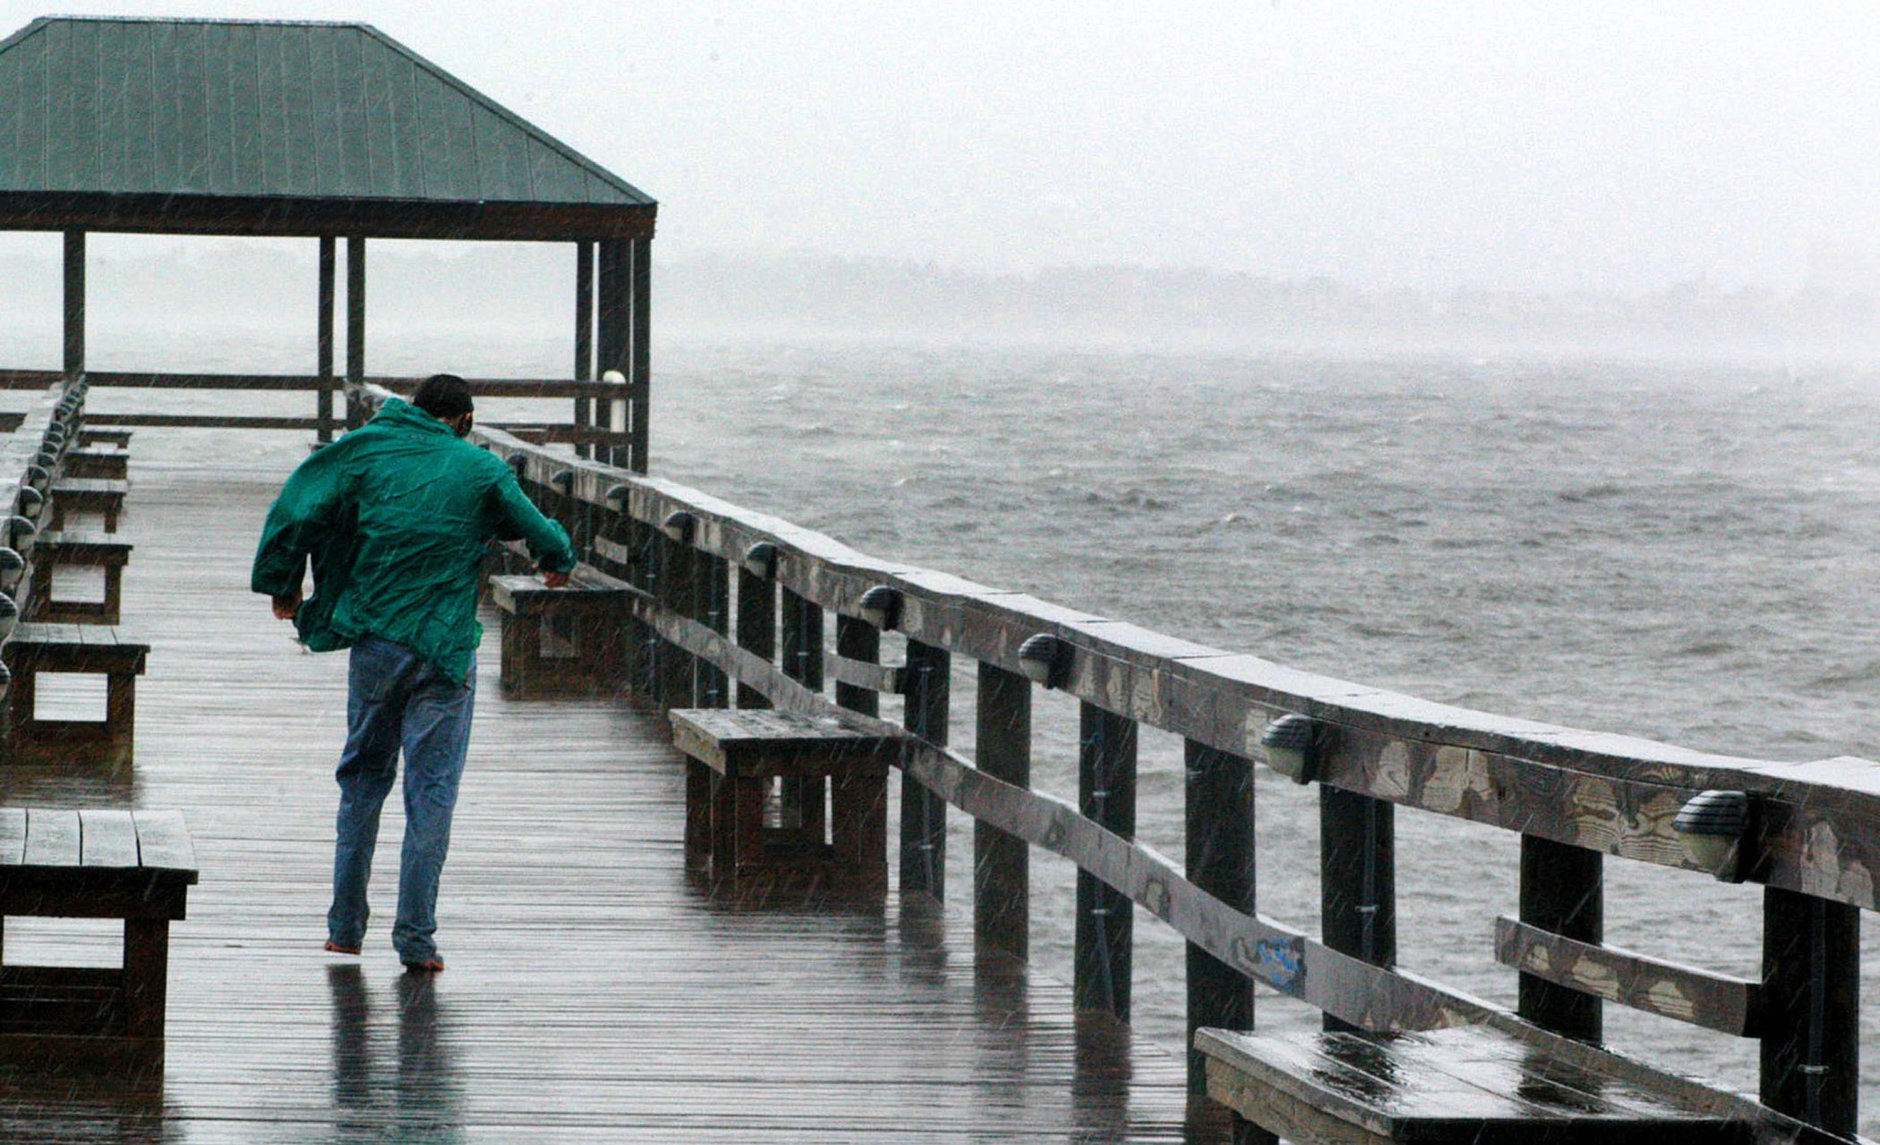 MELBURNE BEACH, FL - SEPTEMBER 4:  Rick Thomas down a pier on the the Indian River to watch the storm September 4, 2004 in Melbourne Beach, Florida. Hurricane Frances is a slow moving category 2 hurricane that is expected to affect Florida for days.  (Photo by Gerardo Mora/Getty Images)